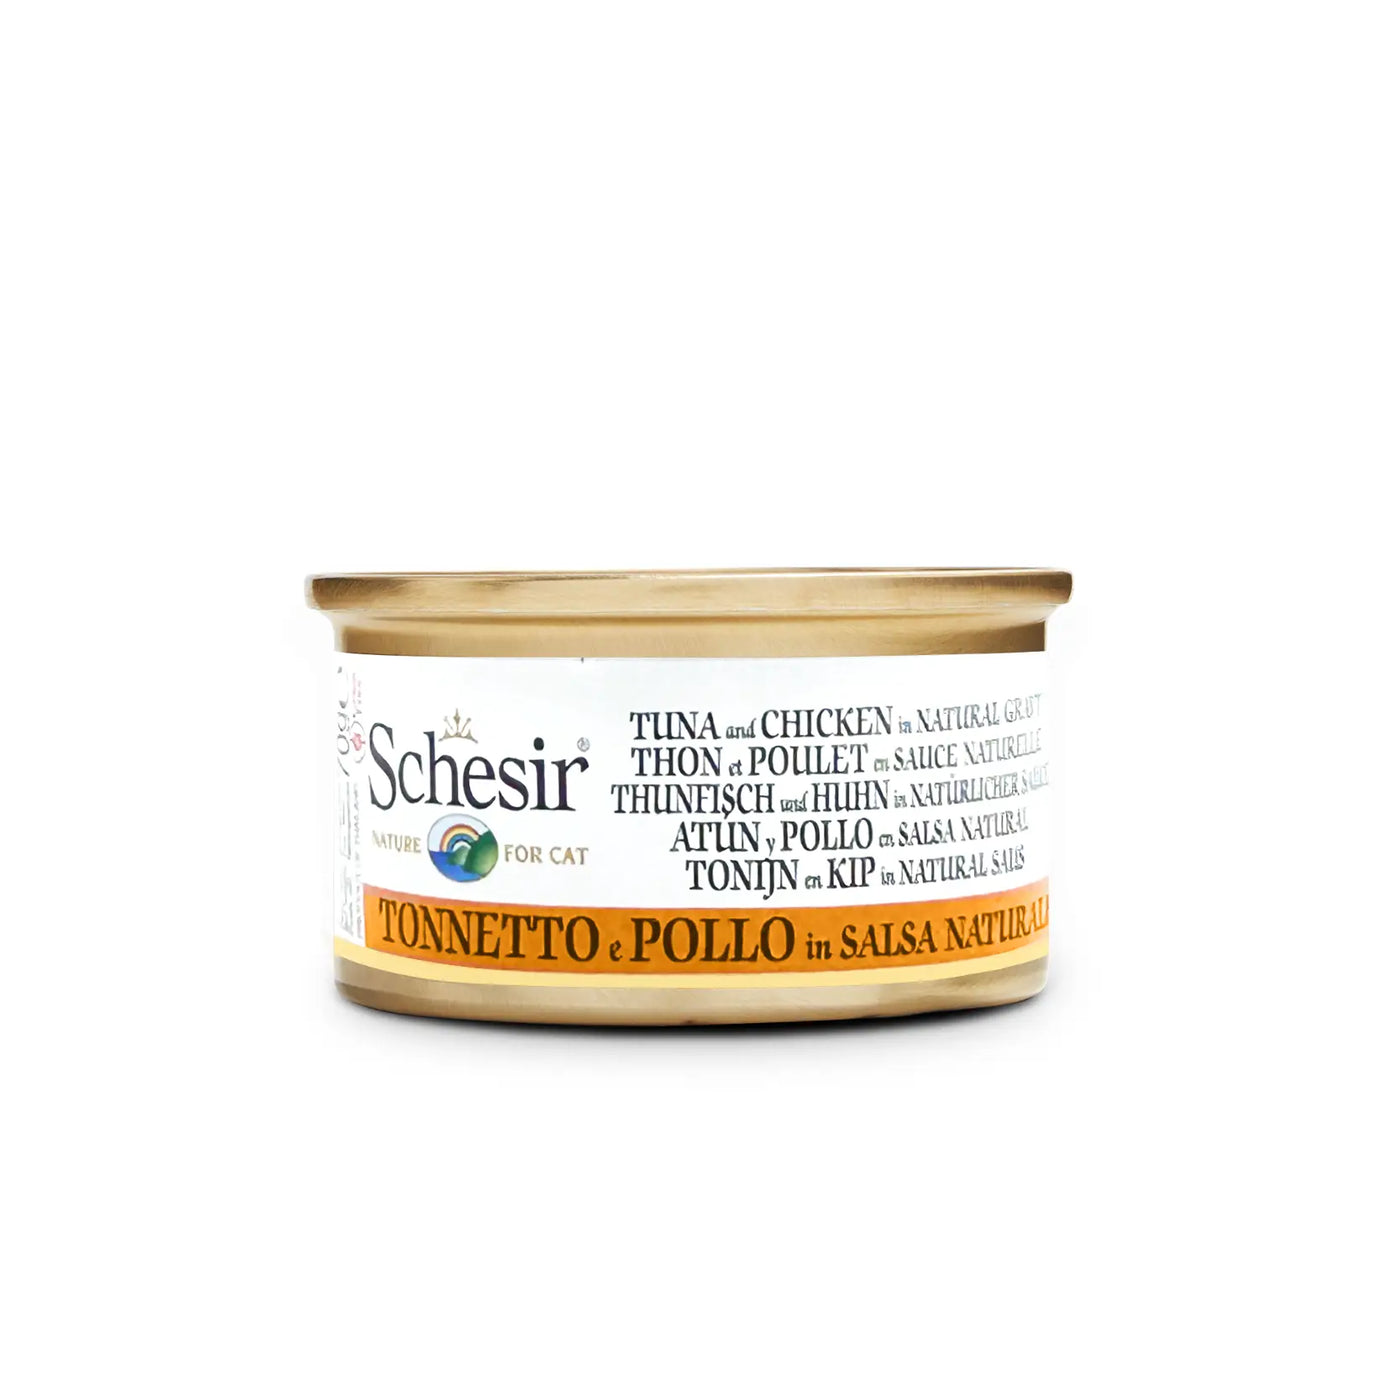 Schesir - Complementary Grain Free Wet Food For Adult Cats - Tuna And Chicken In Natural Gravy 70g